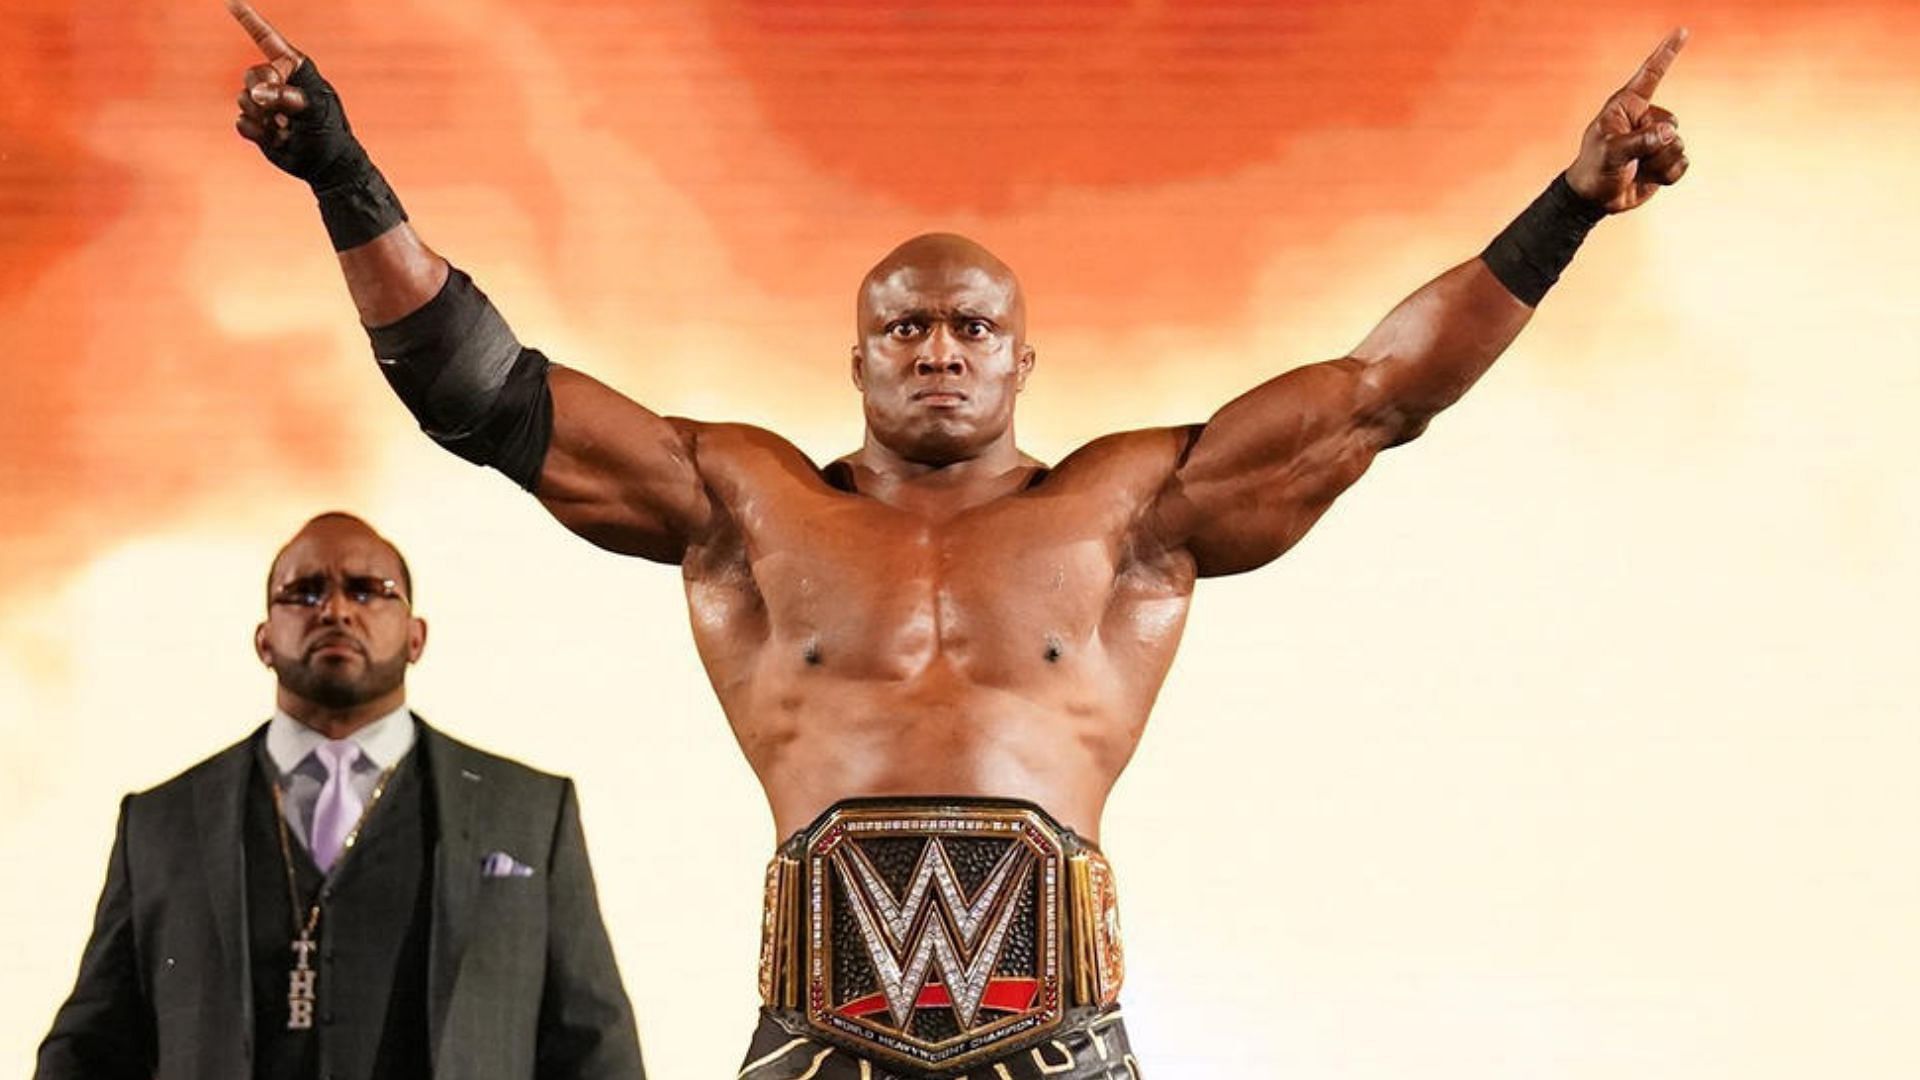 Bobby Lashley is an established star in WWE and MMA.